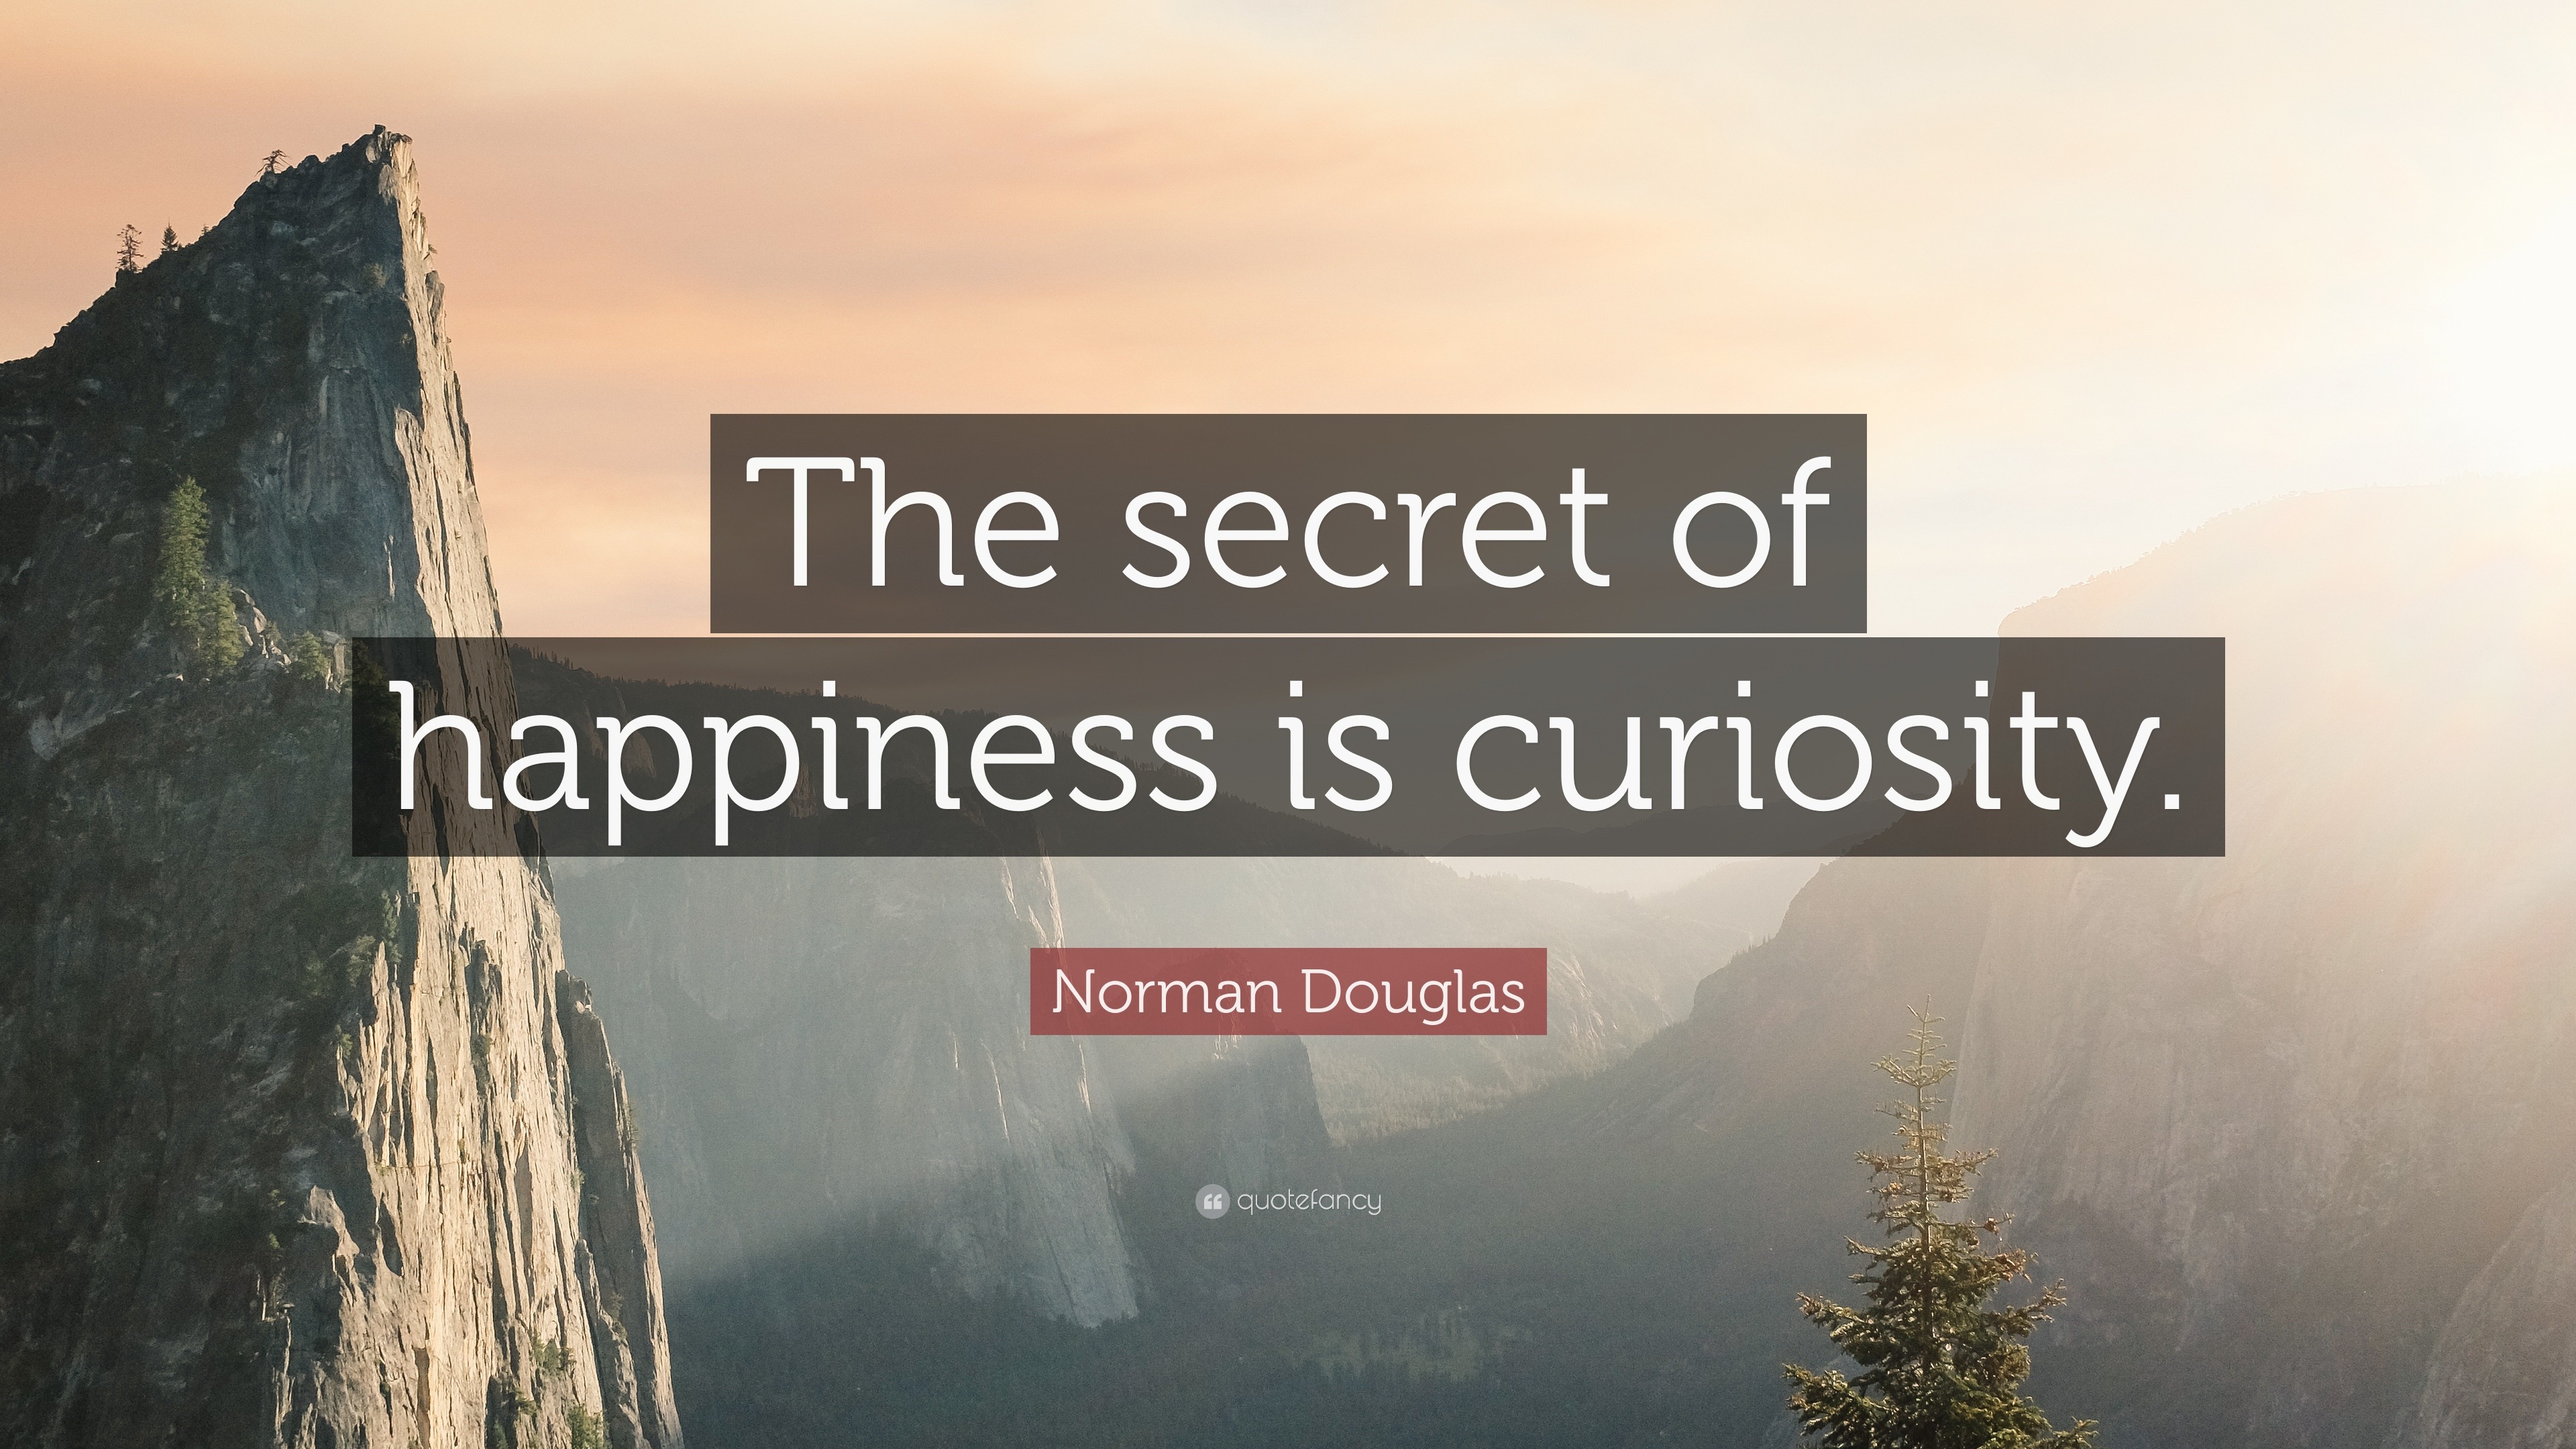 Norman Douglas Quote: “The secret of happiness is curiosity.”